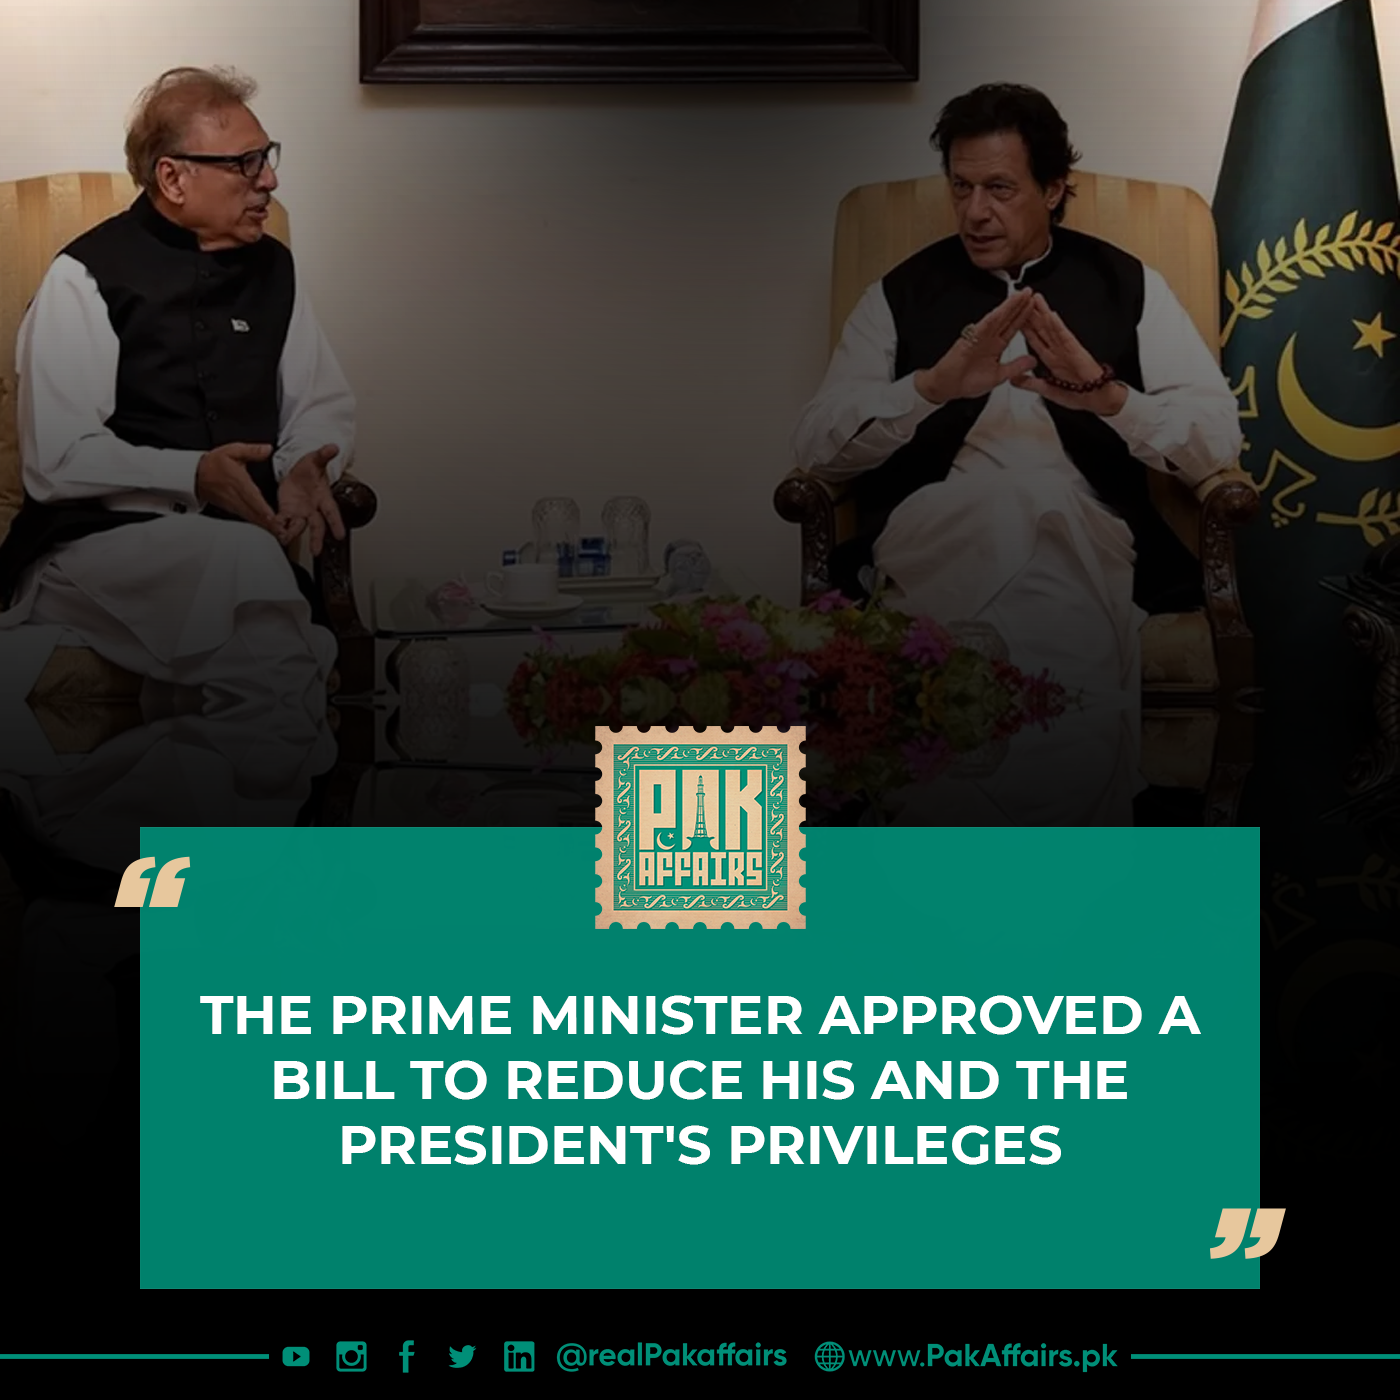 The Prime Minister approved a bill to reduce his and the President's privileges.